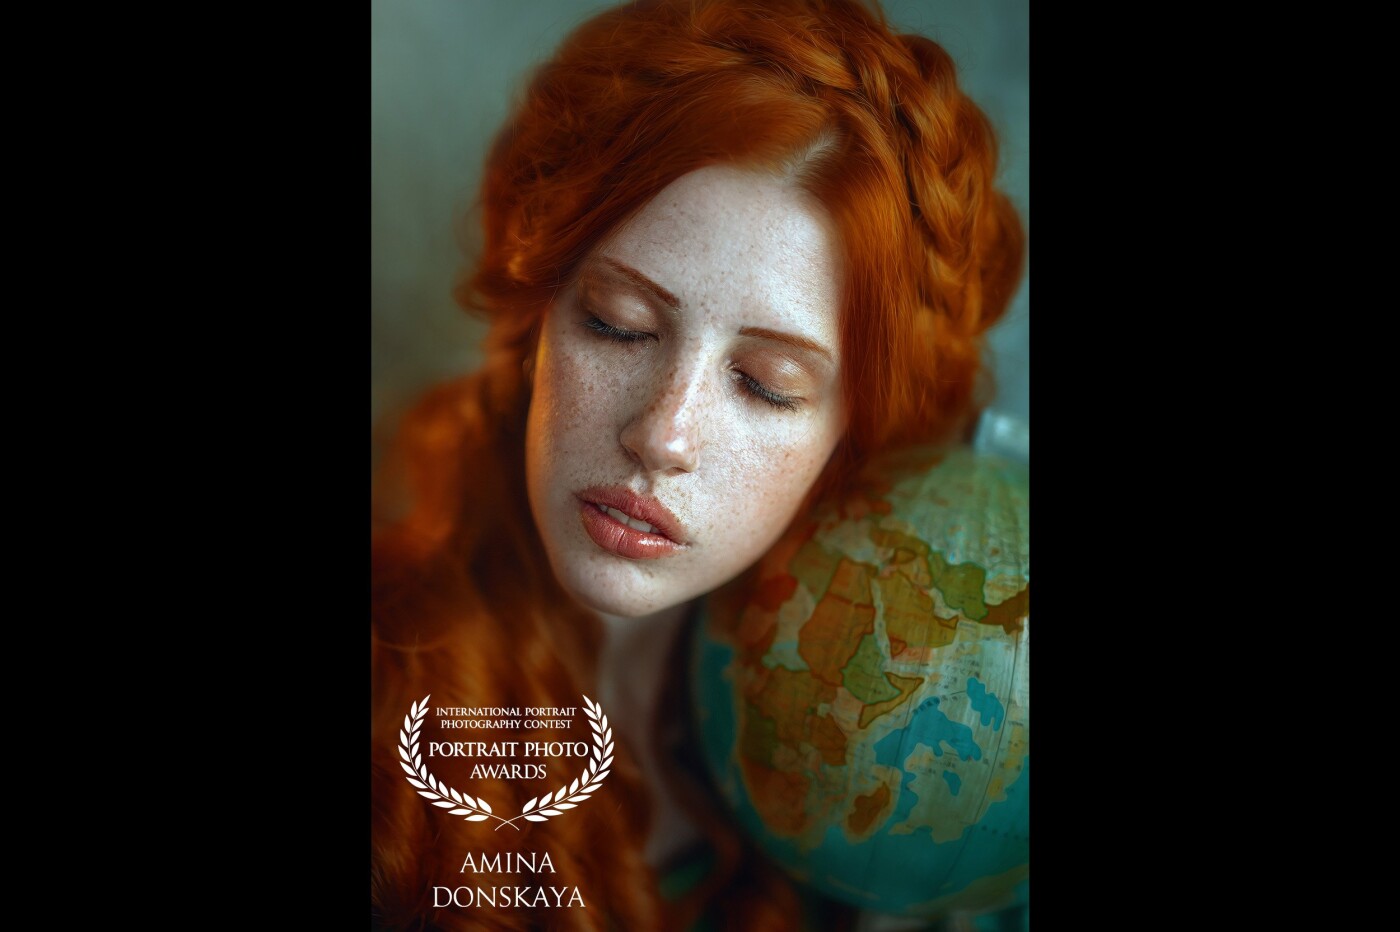 Nicole, an amazing red hair girl, her youth inspired me to take this photo. <br />
When we are young we feel like the whole world is in our hands, we are free to choose to do whatever we want, to travel, to know new cultures, to learn new languages, everything seems posible.<br />
Sony A7iii + Sigma Art 50mm 1.4<br />
Santiago, Chile 2019